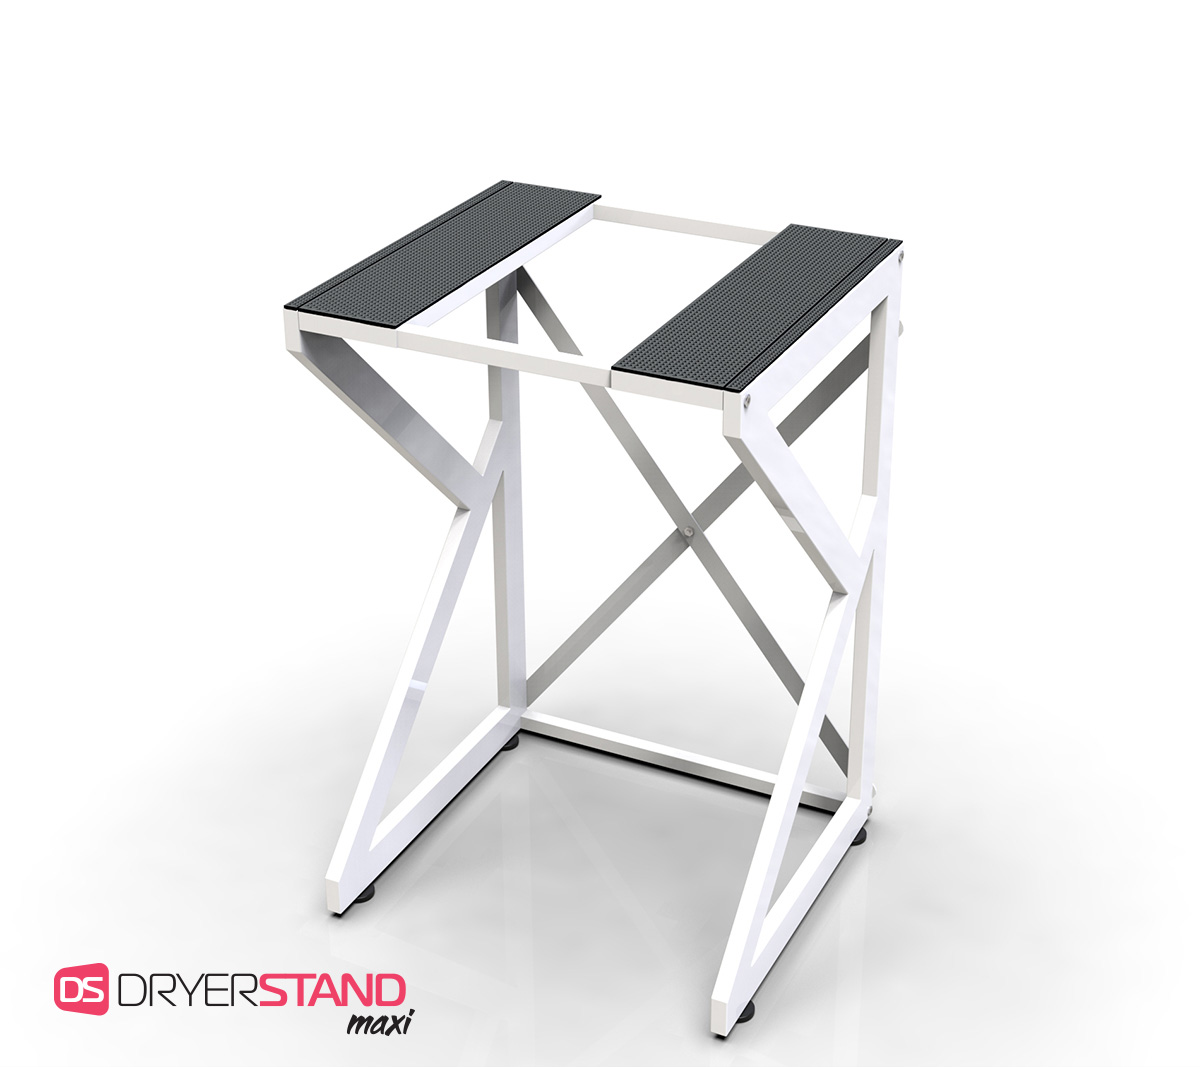  Dryer Stand Height Adjustable, Portable Stacking Kit for Front  Loader Washing Machine & Tumble Dryer, Storage Rack Over Washing Machine  Storage Unit, 300kg Load Capacity WhiteFrame White : Appliances